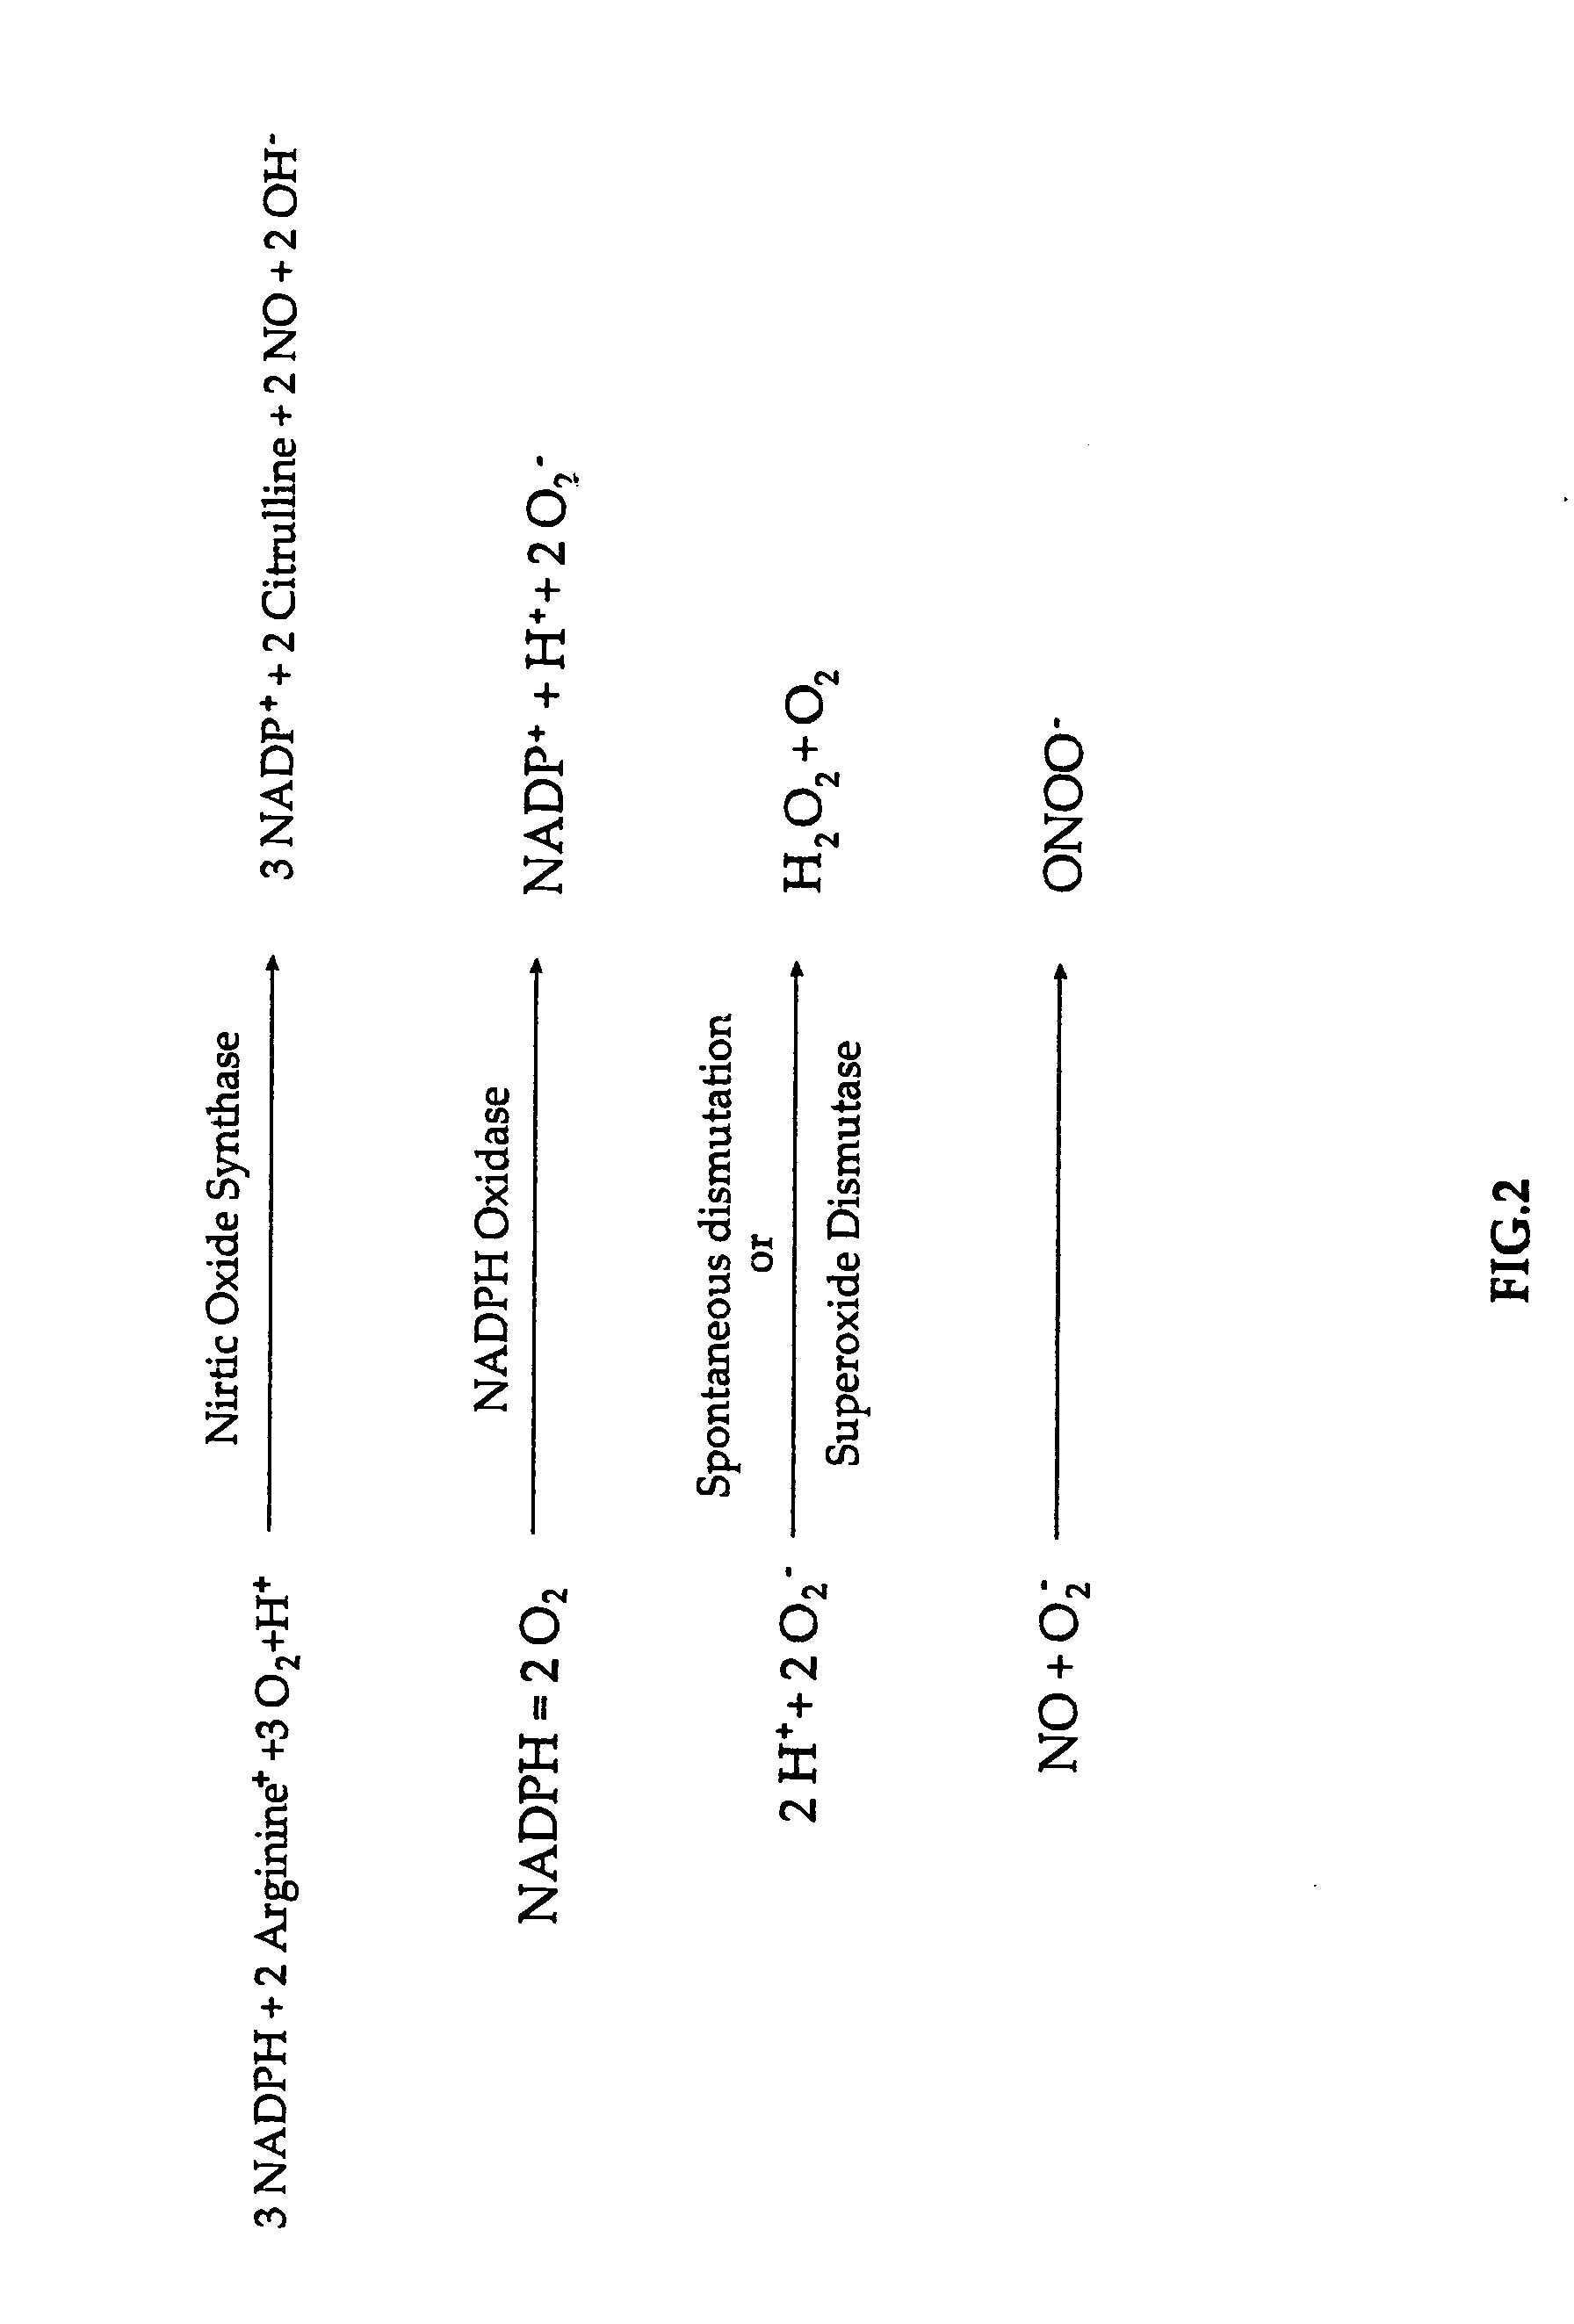 Population of cells utilizable for substance detection and methods and devices using same